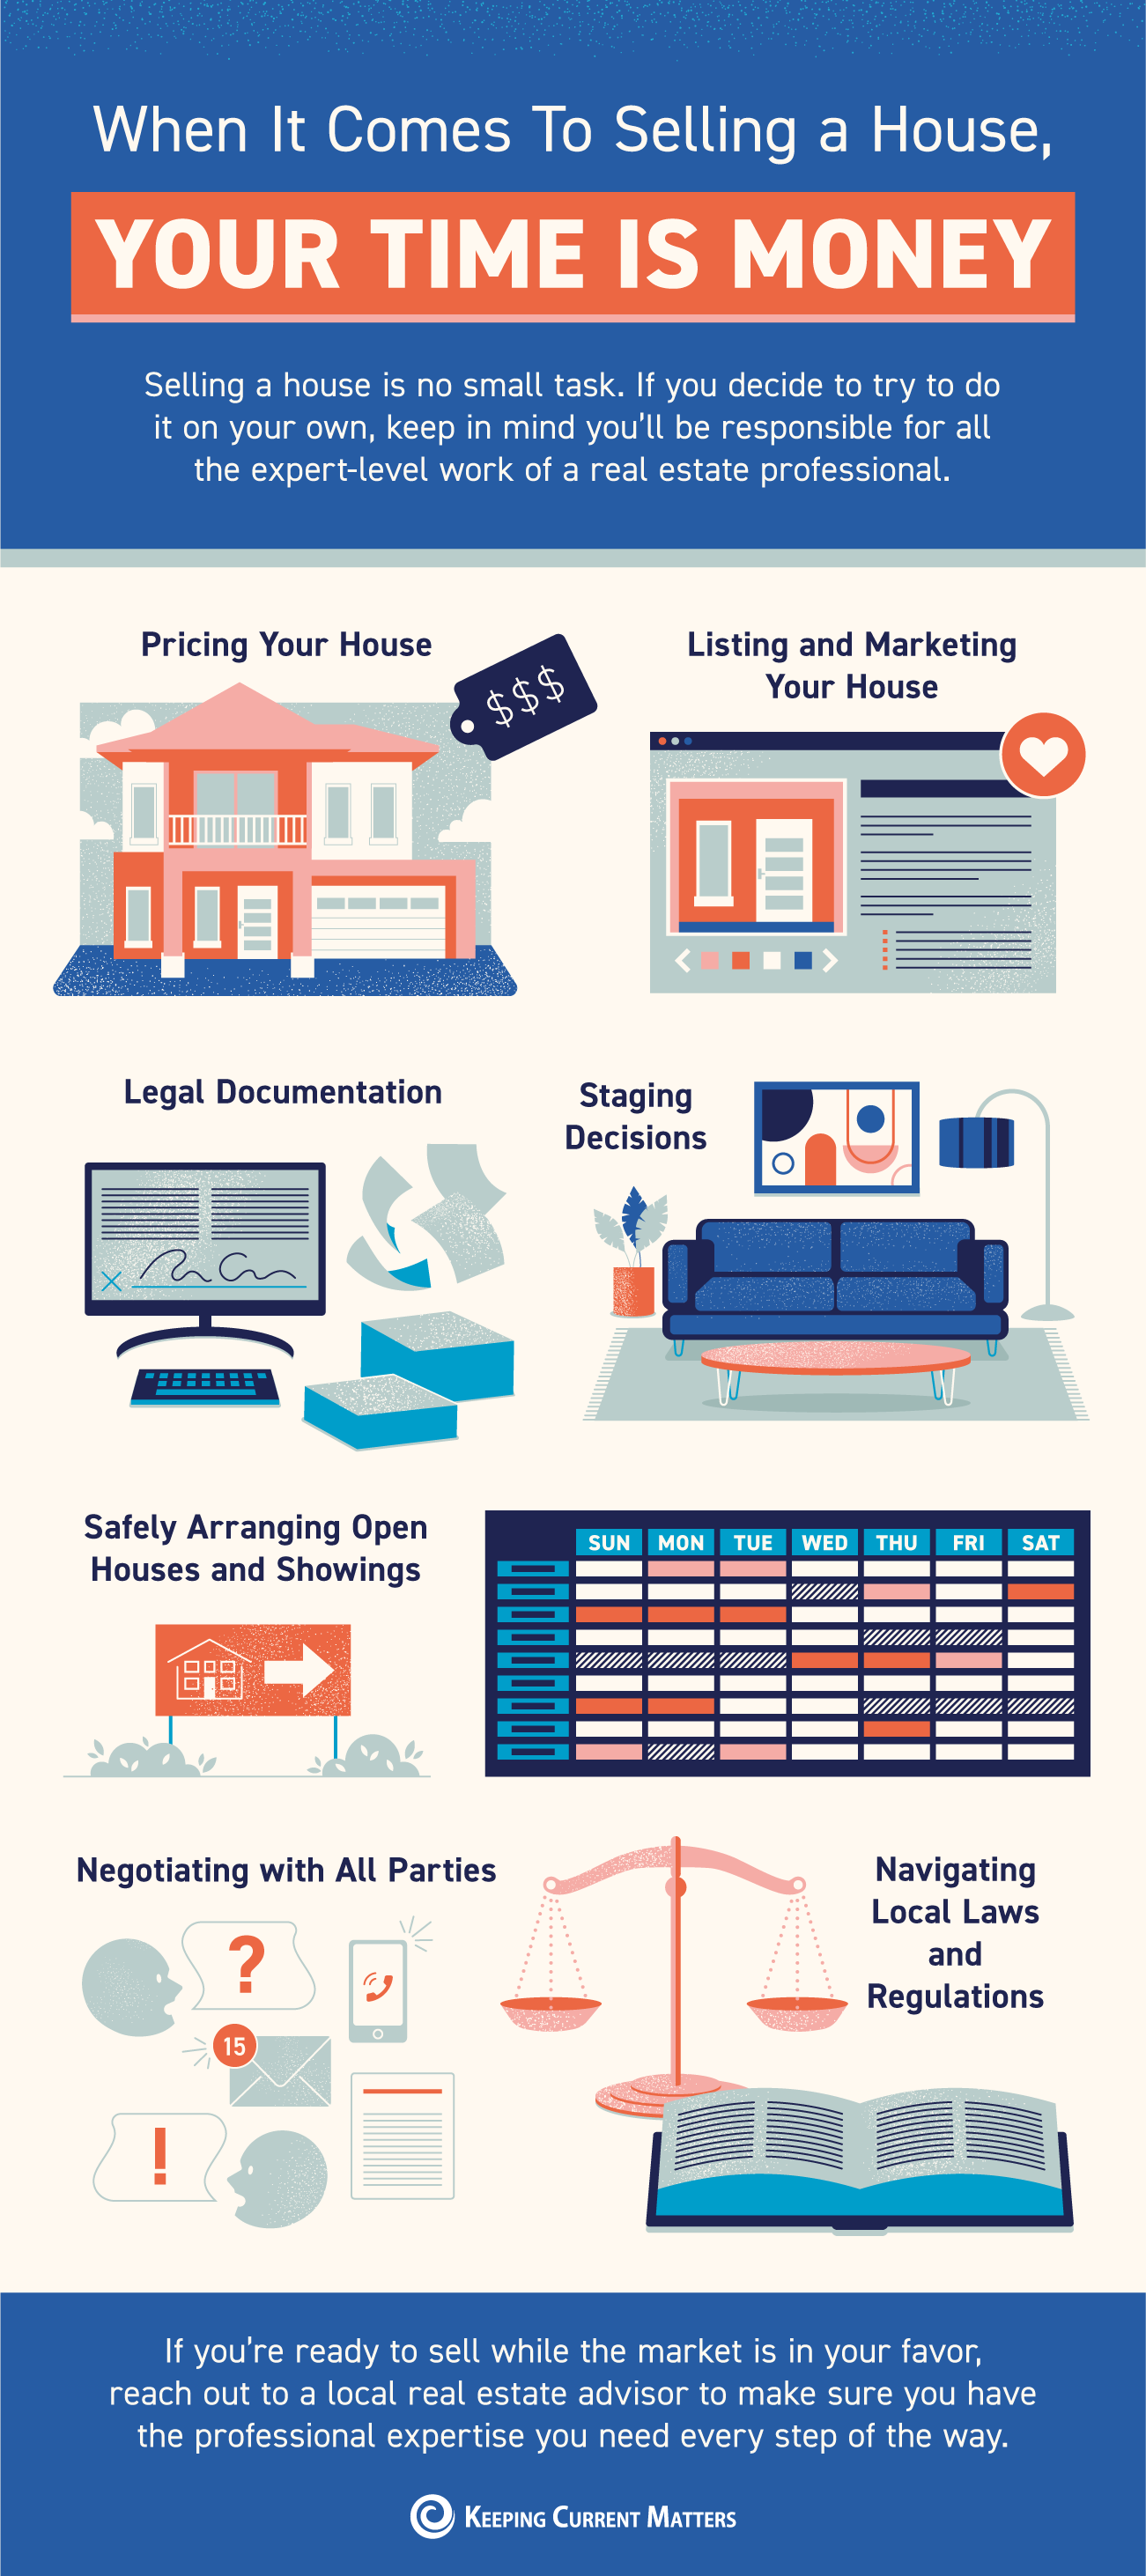 When It Comes To Selling a House, Your Time Is Money [INFOGRAPHIC] | Keeping Current Matters